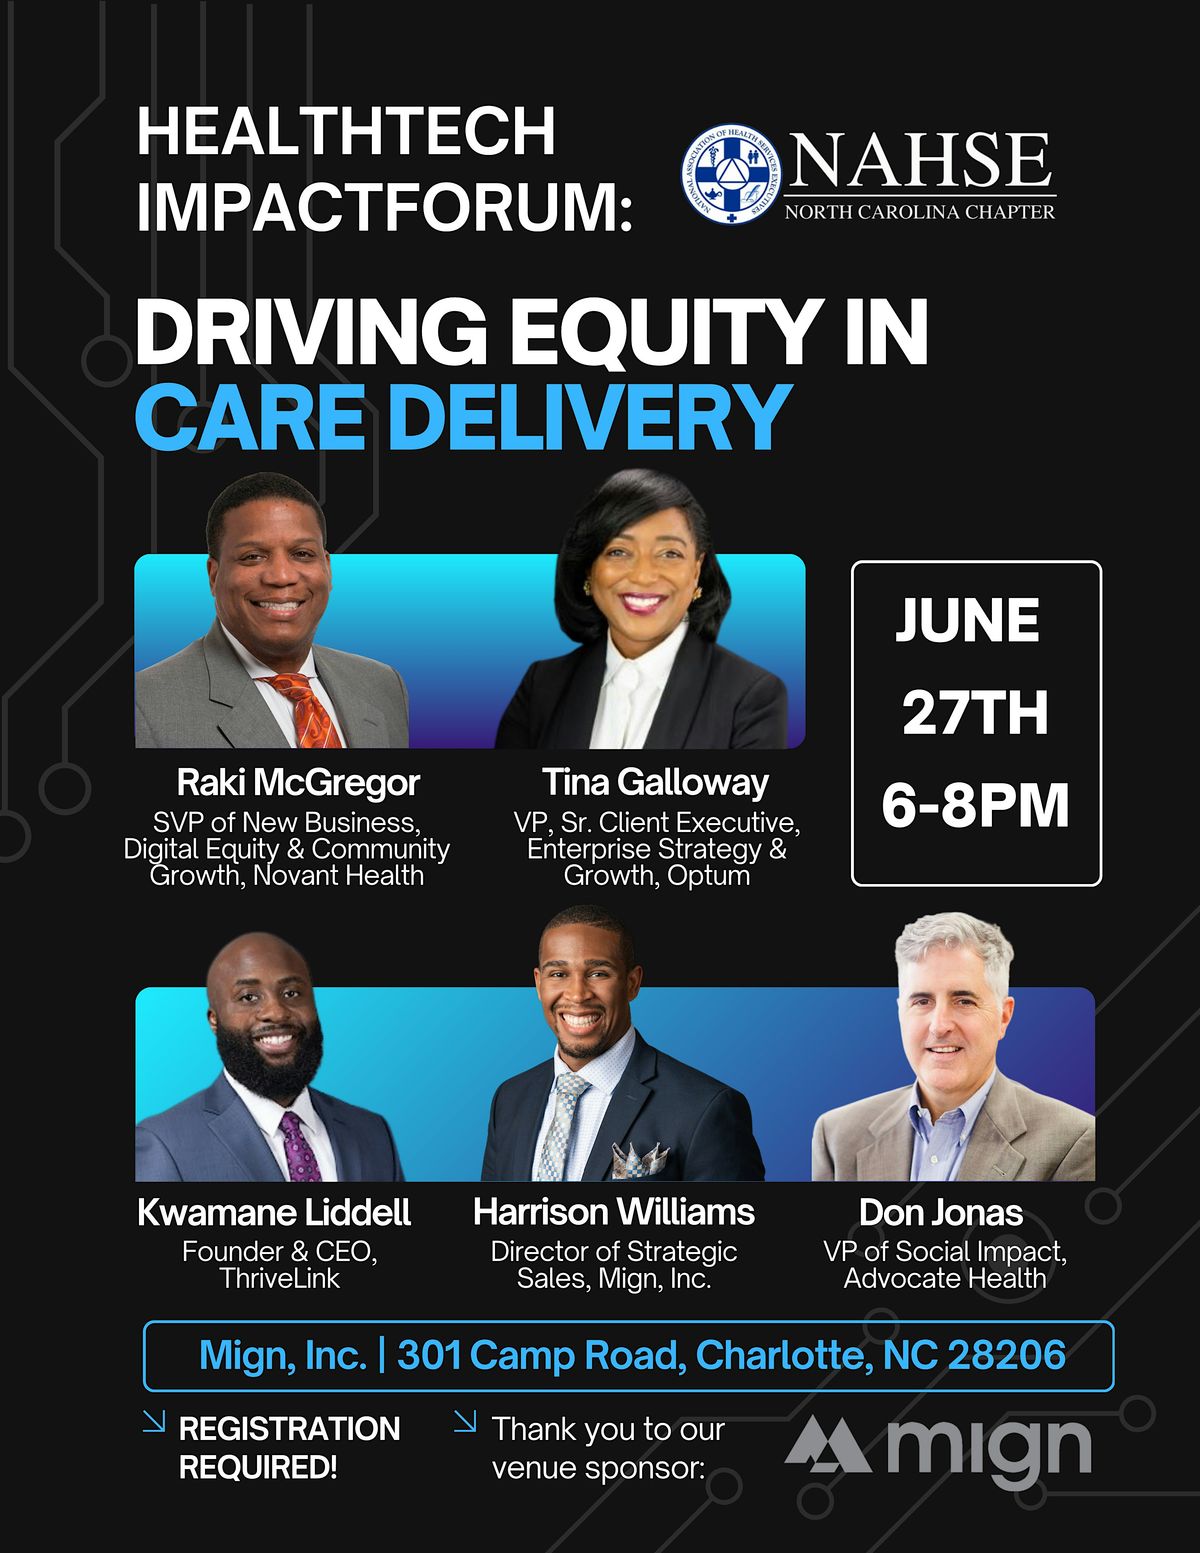 HealthTech Impact Forum: Driving Equity in Care Delivery